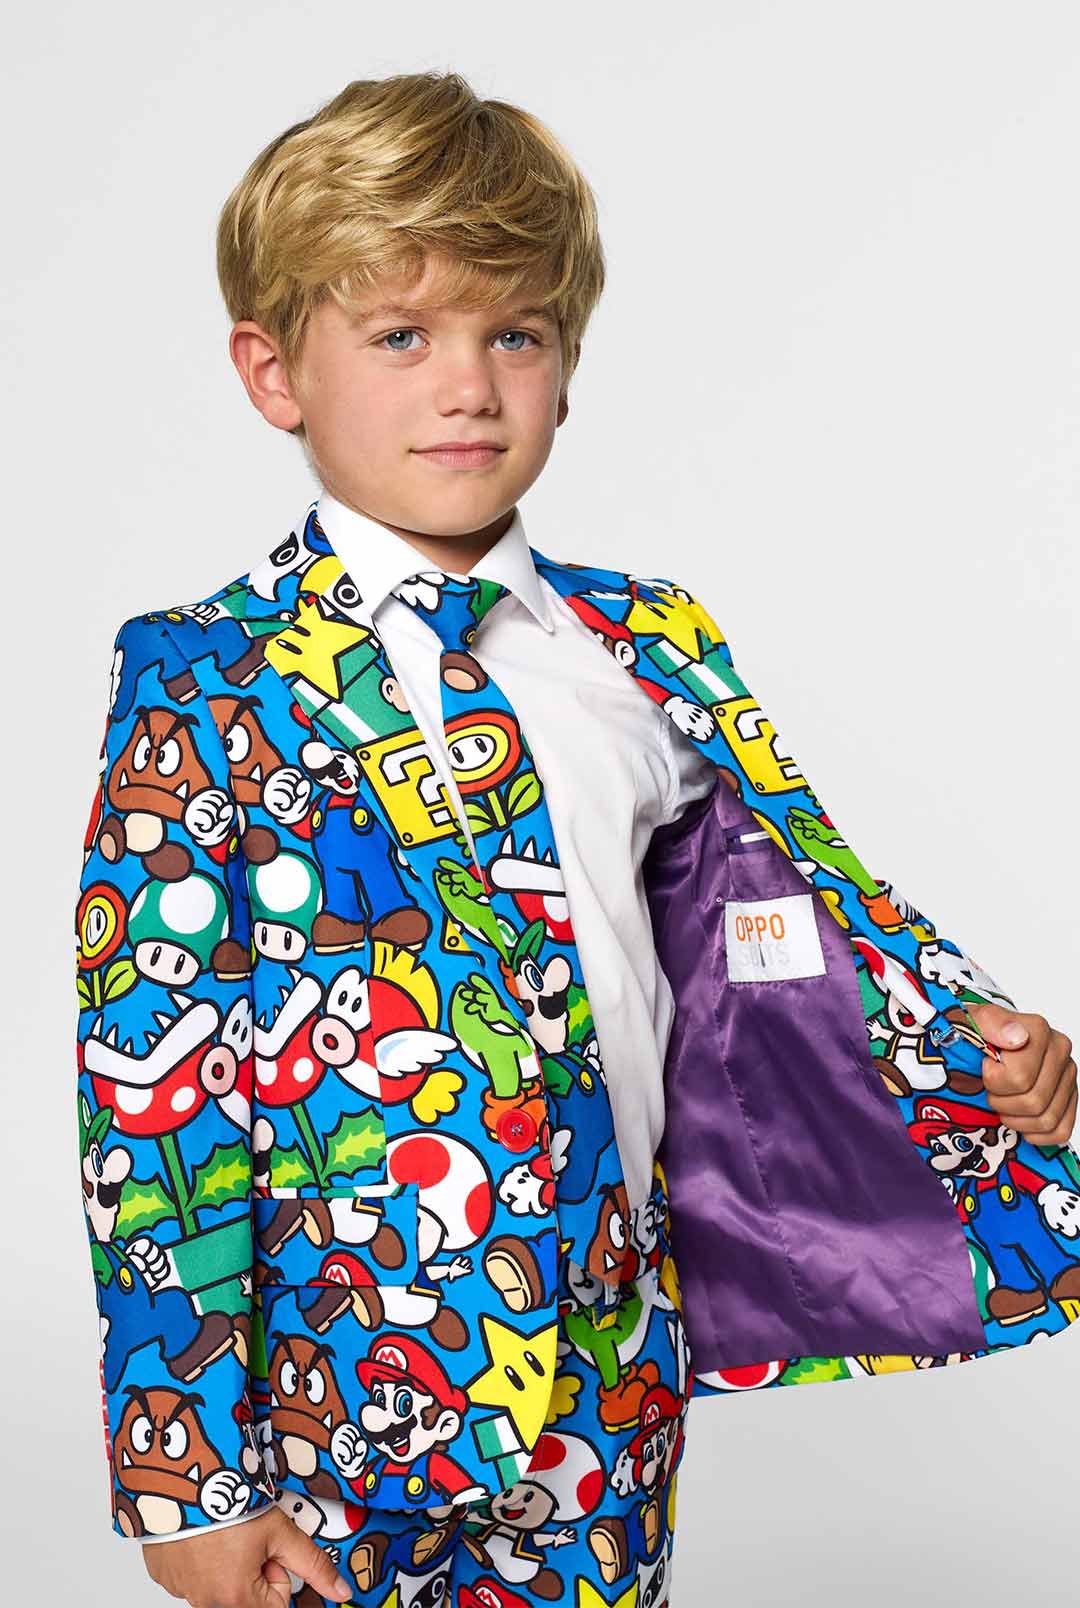 Super Mario™ | Officially Licensed Mario Suit for Boys | OppoSuits ...